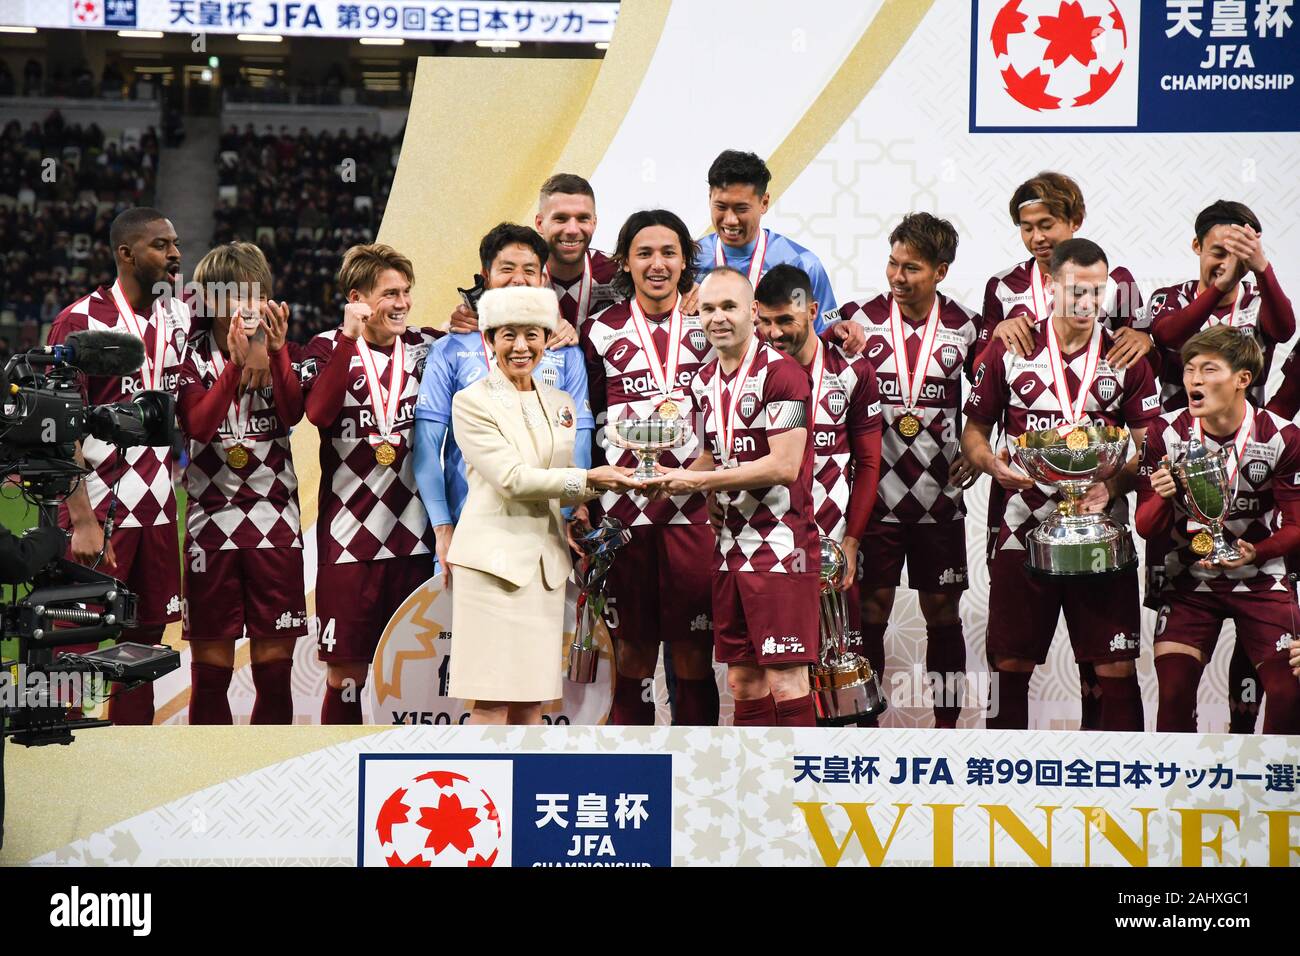 Tokyo, Japan. 1st Jan, 2020. Princess Takamodo presents the trophy to Vissel Kobe soccer team capitan Andres Iniesta during the Emperor's Cup 99th Japan Football Association Championship awards ceremony. The game was held at the stadium that will serve as the main venue of the Tokyo 2020 Olympic Games. Photo taken onã€€Wednesday January 1, 2020. Photo by: Ramiro Agustin Vargas Tabares Credit: Ramiro Agustin Vargas Tabares/ZUMA Wire/Alamy Live News Stock Photo